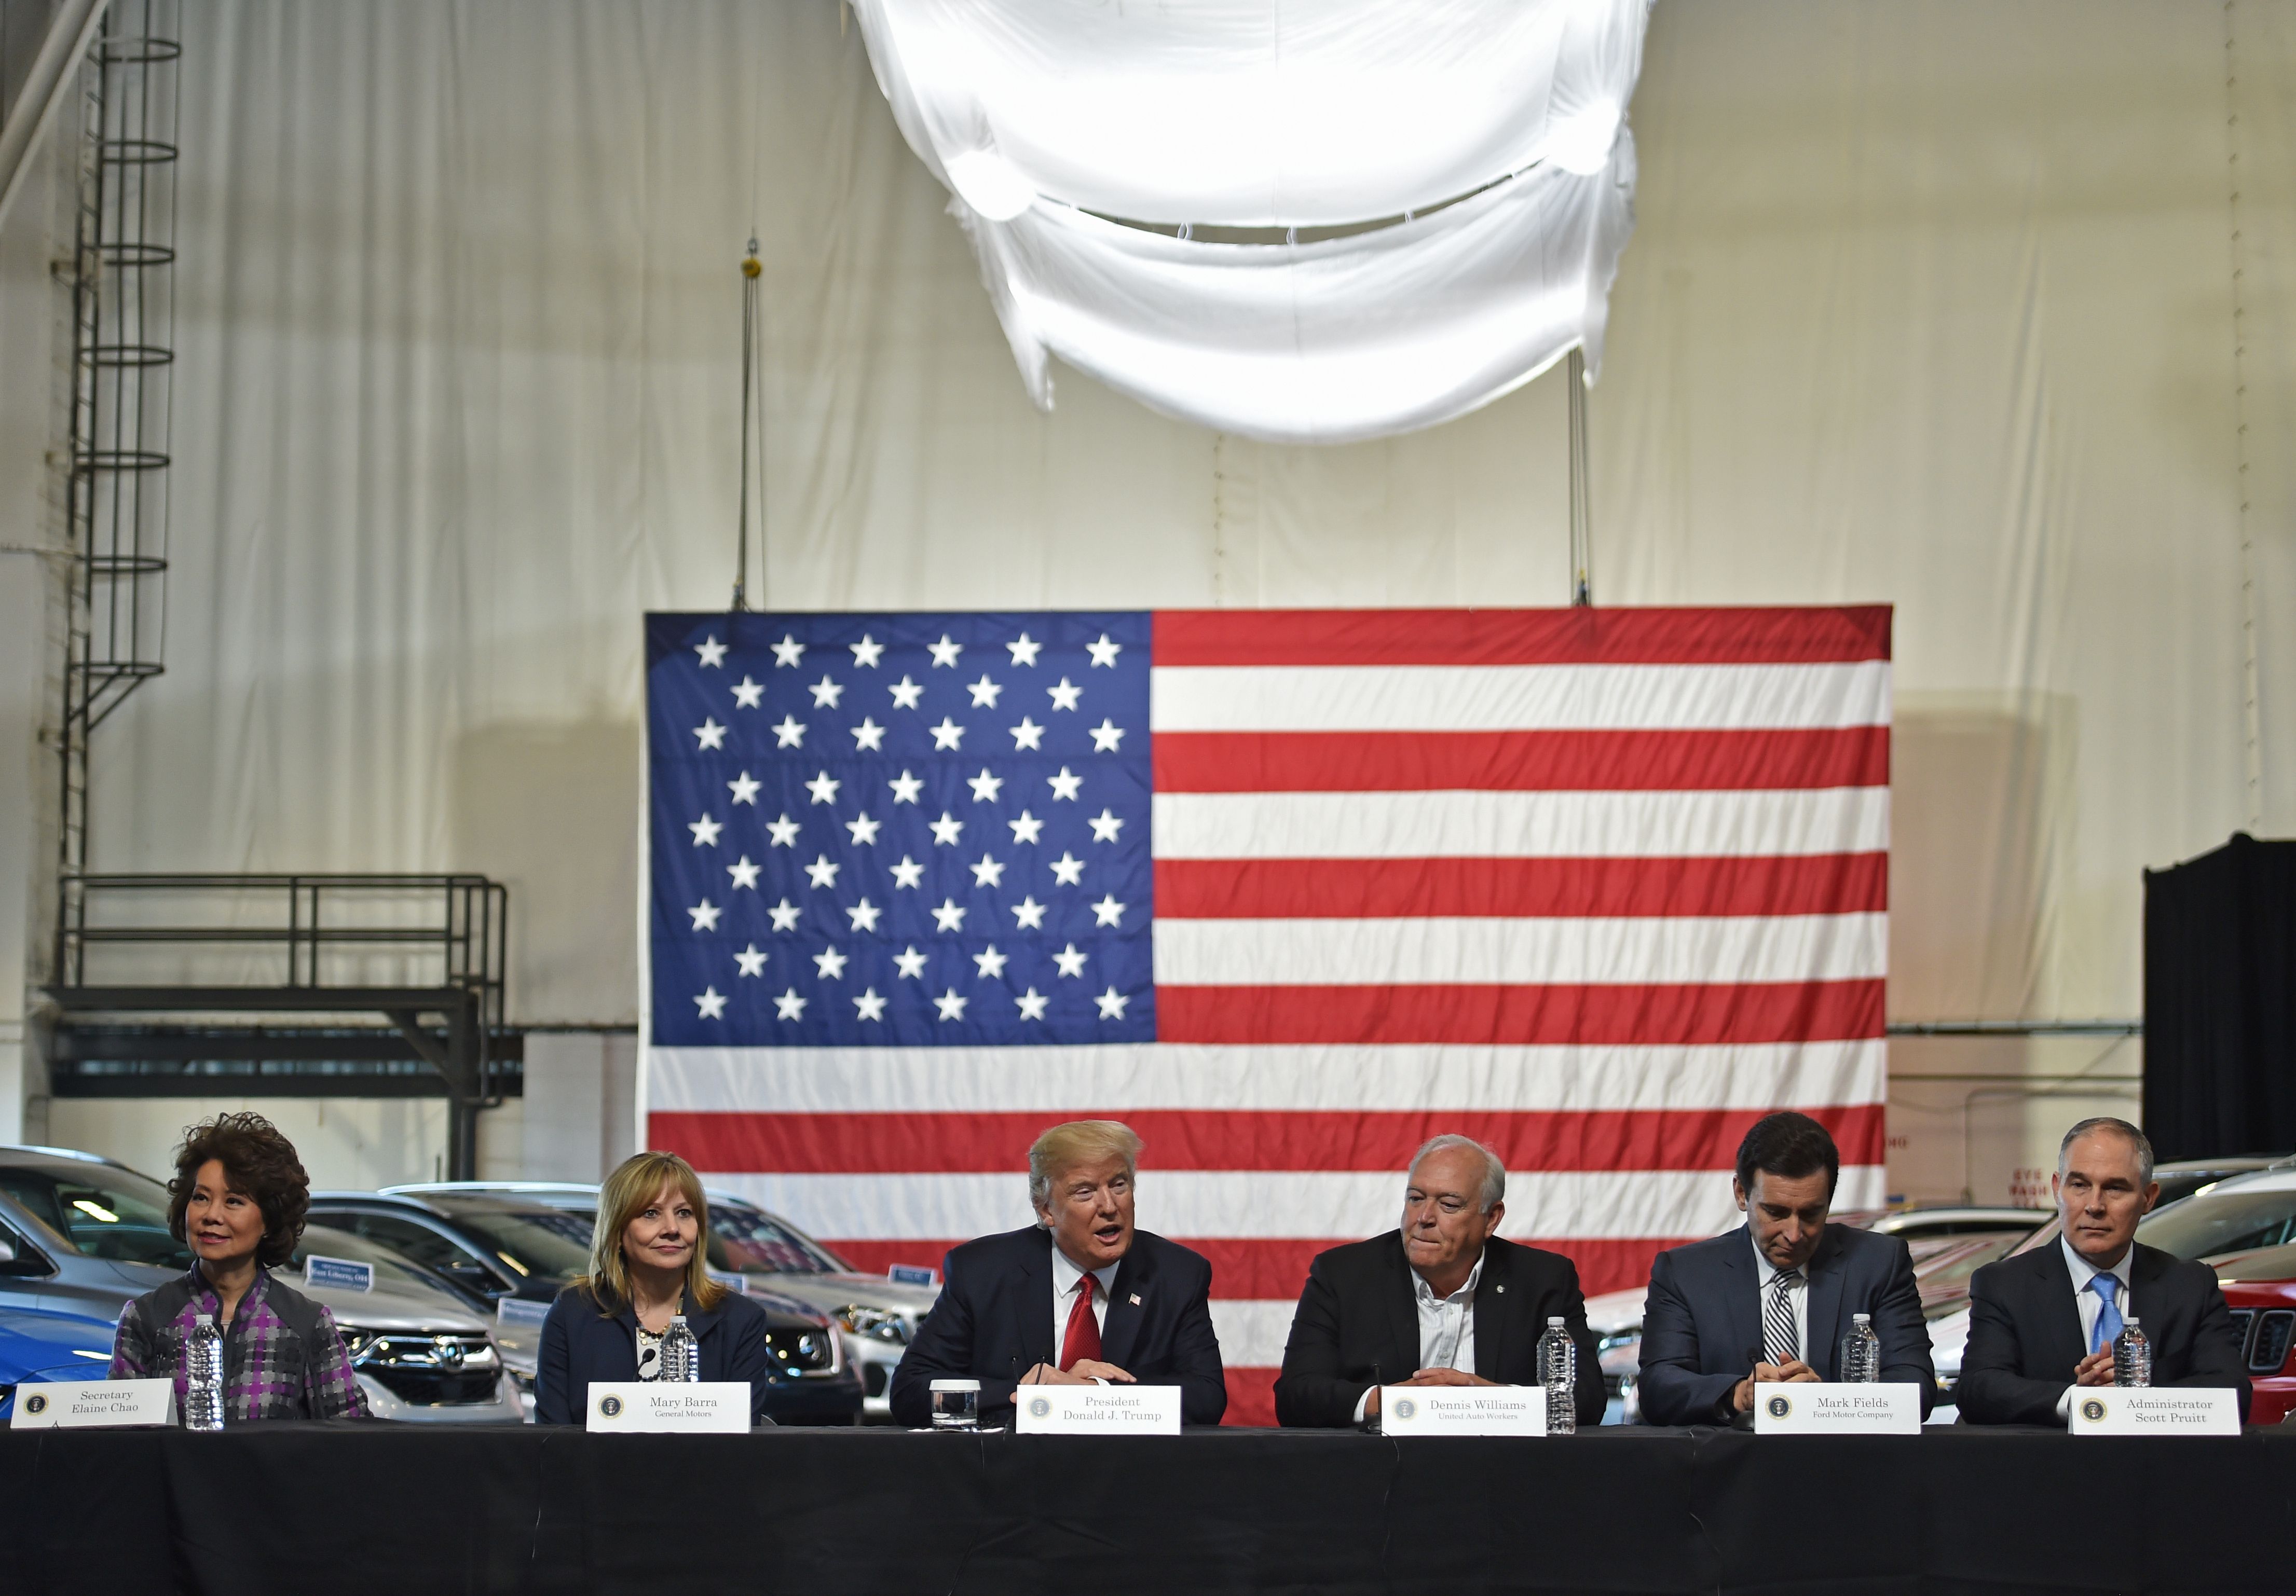 President Donald Trump delivers remarks at an auto manufacturing hub, the American Center for Mobility in Michigan on March 15 (Nicholas Kamm—AFP/Getty Images)